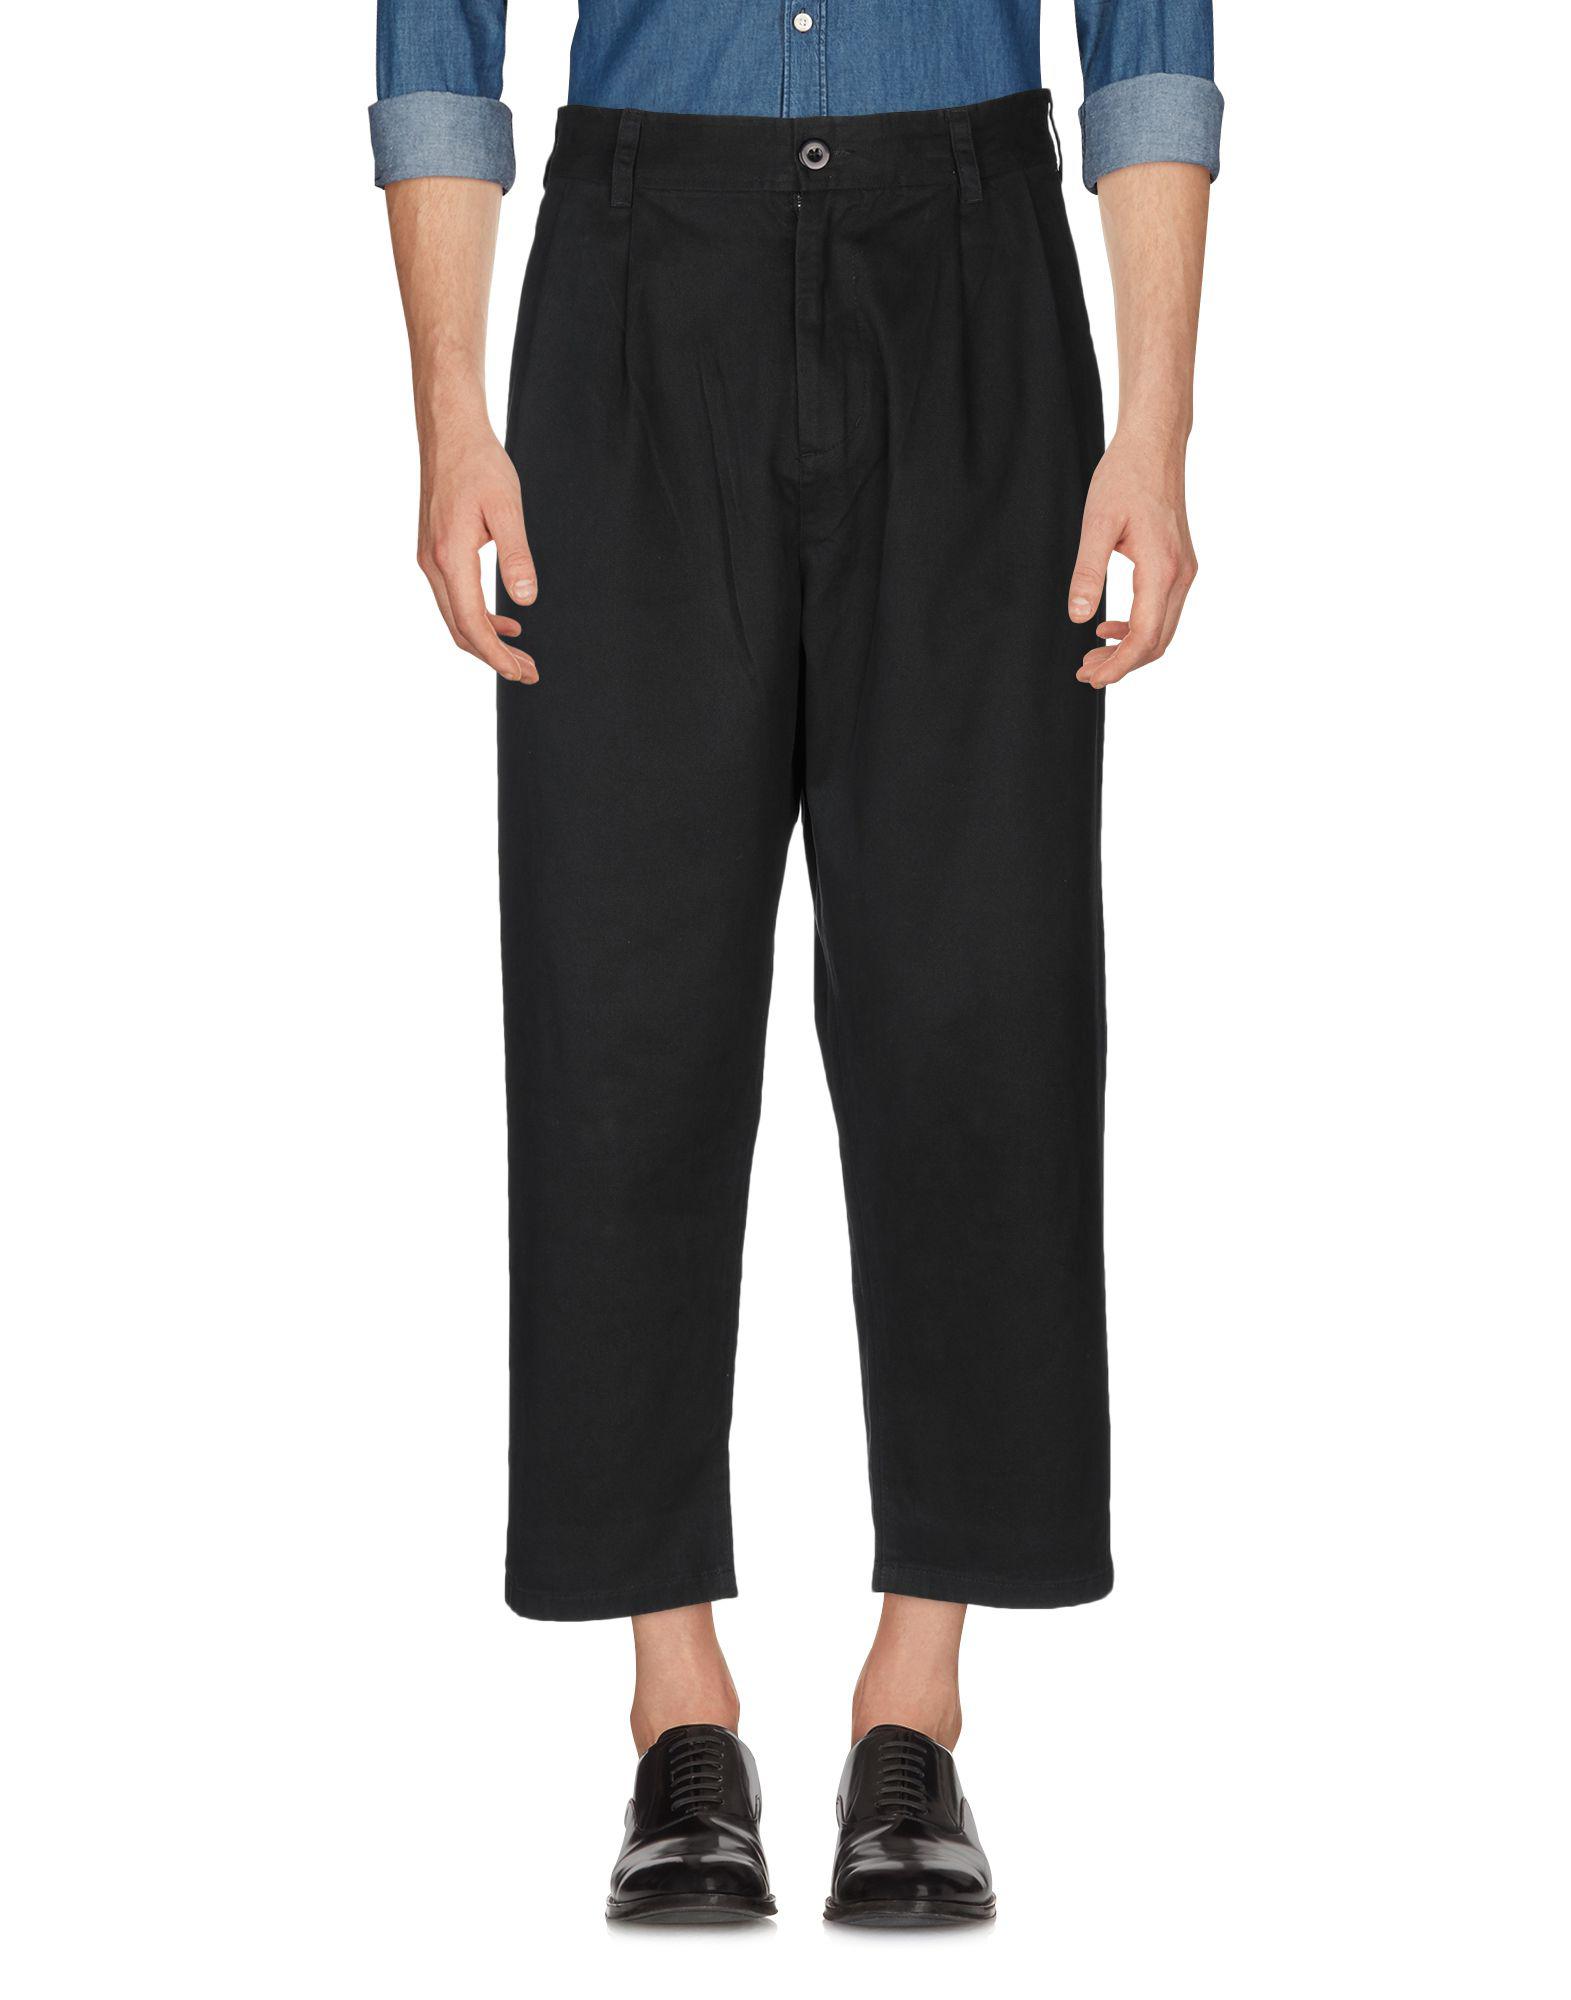 Obey Cotton Casual Pants in Black for Men - Lyst